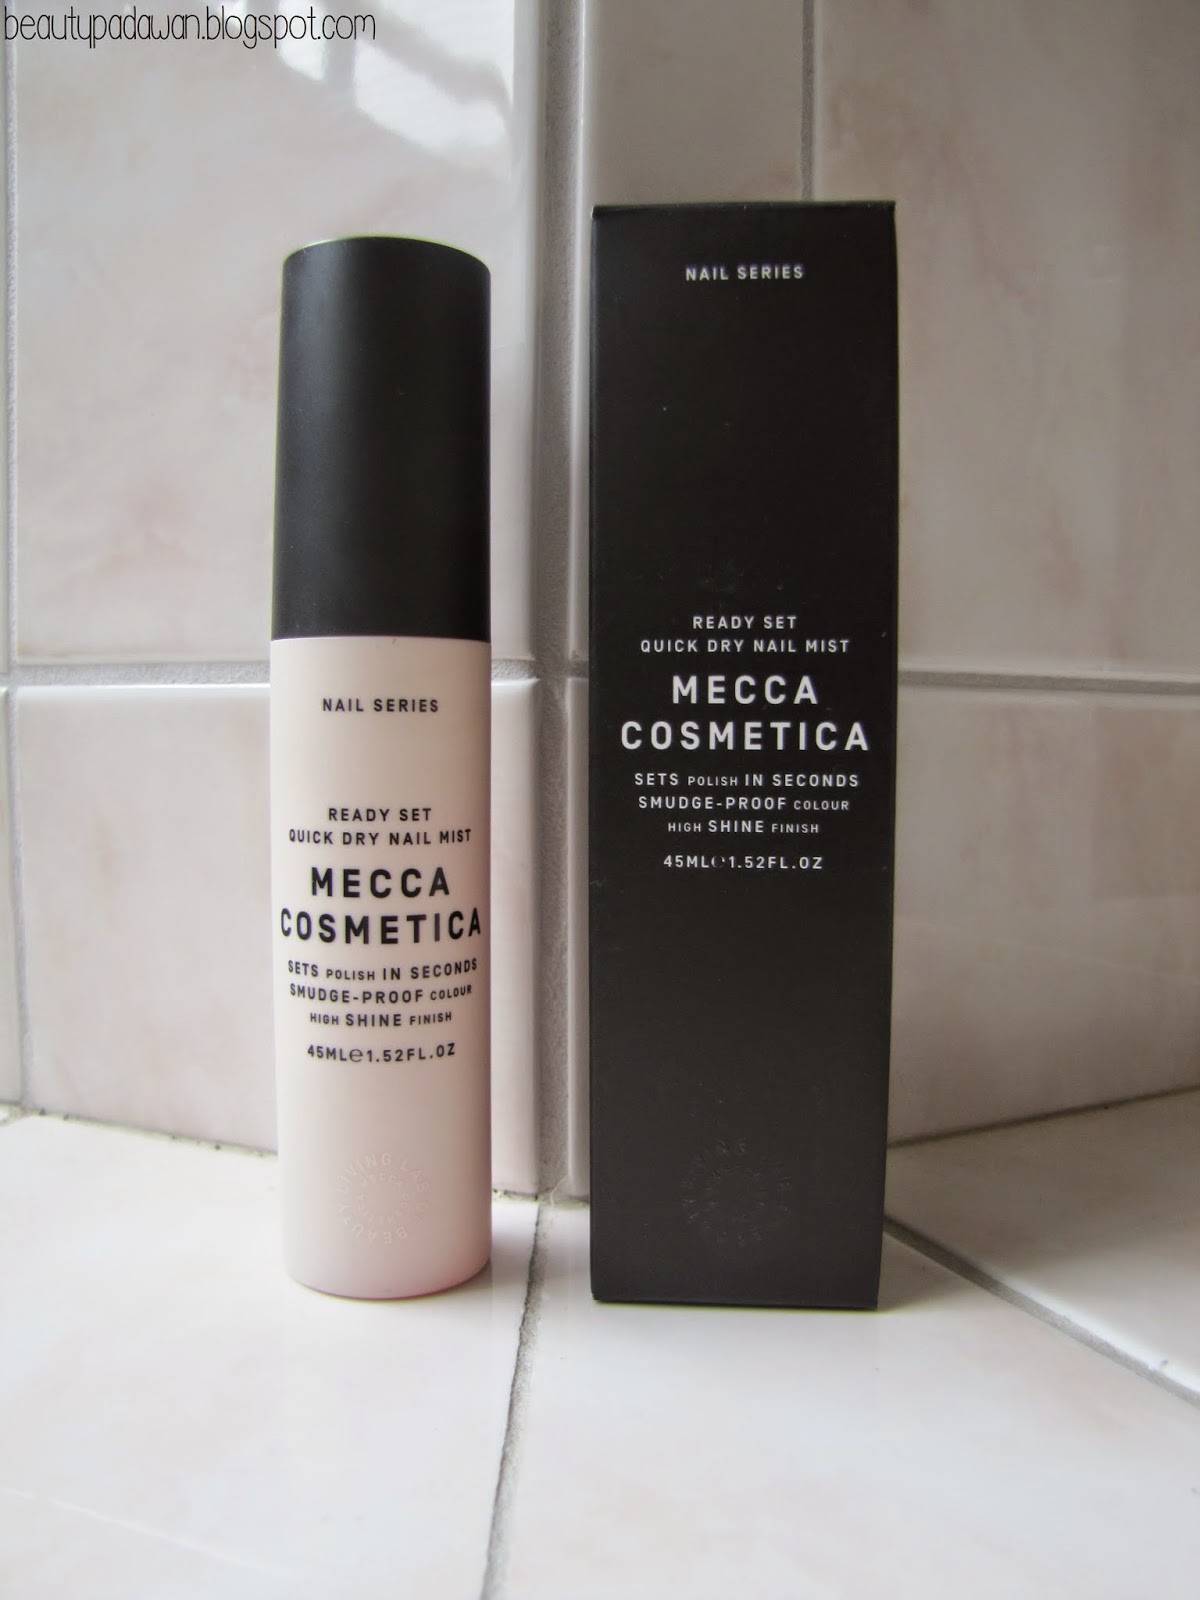 Mecca Cosmetica Ready Set Quick Dry Nail Mist